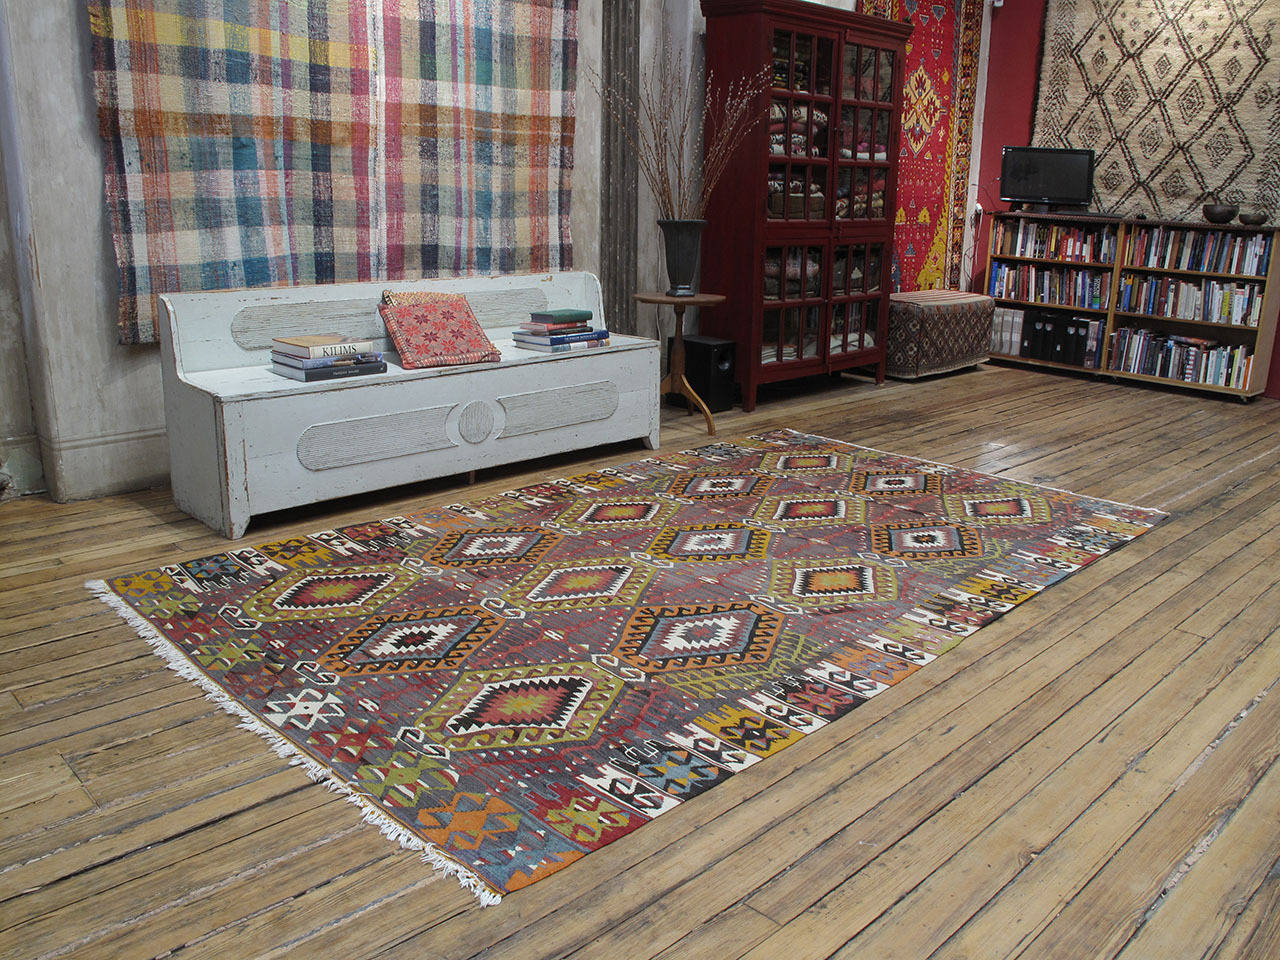 West Anatolian Kilim rug. A very attractive and high quality example of kilim weaving from Western Turkey. Such rug pieces display the ability of talented weavers to interpret classical motifs and create original compositions, keeping centuries-old